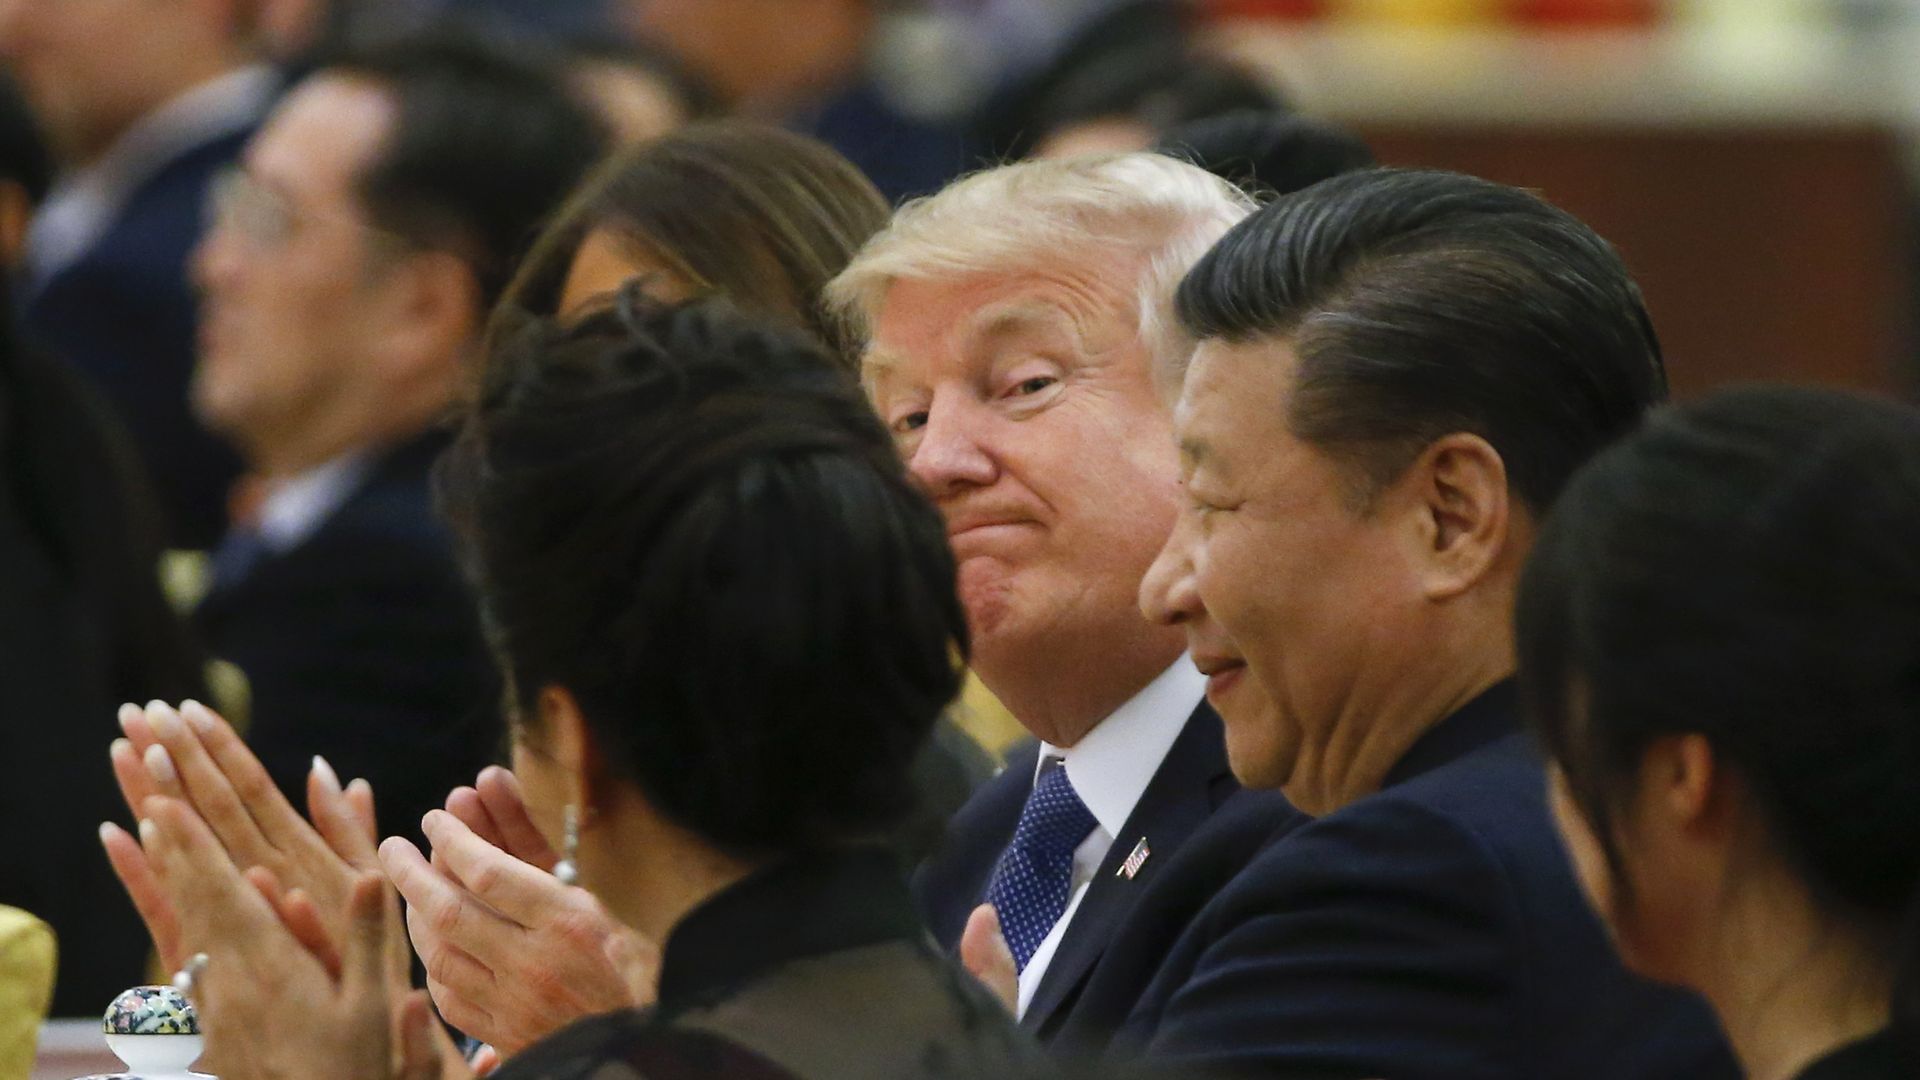 Photo of President Trump smirking at camera as he sits next to President Xi at a function